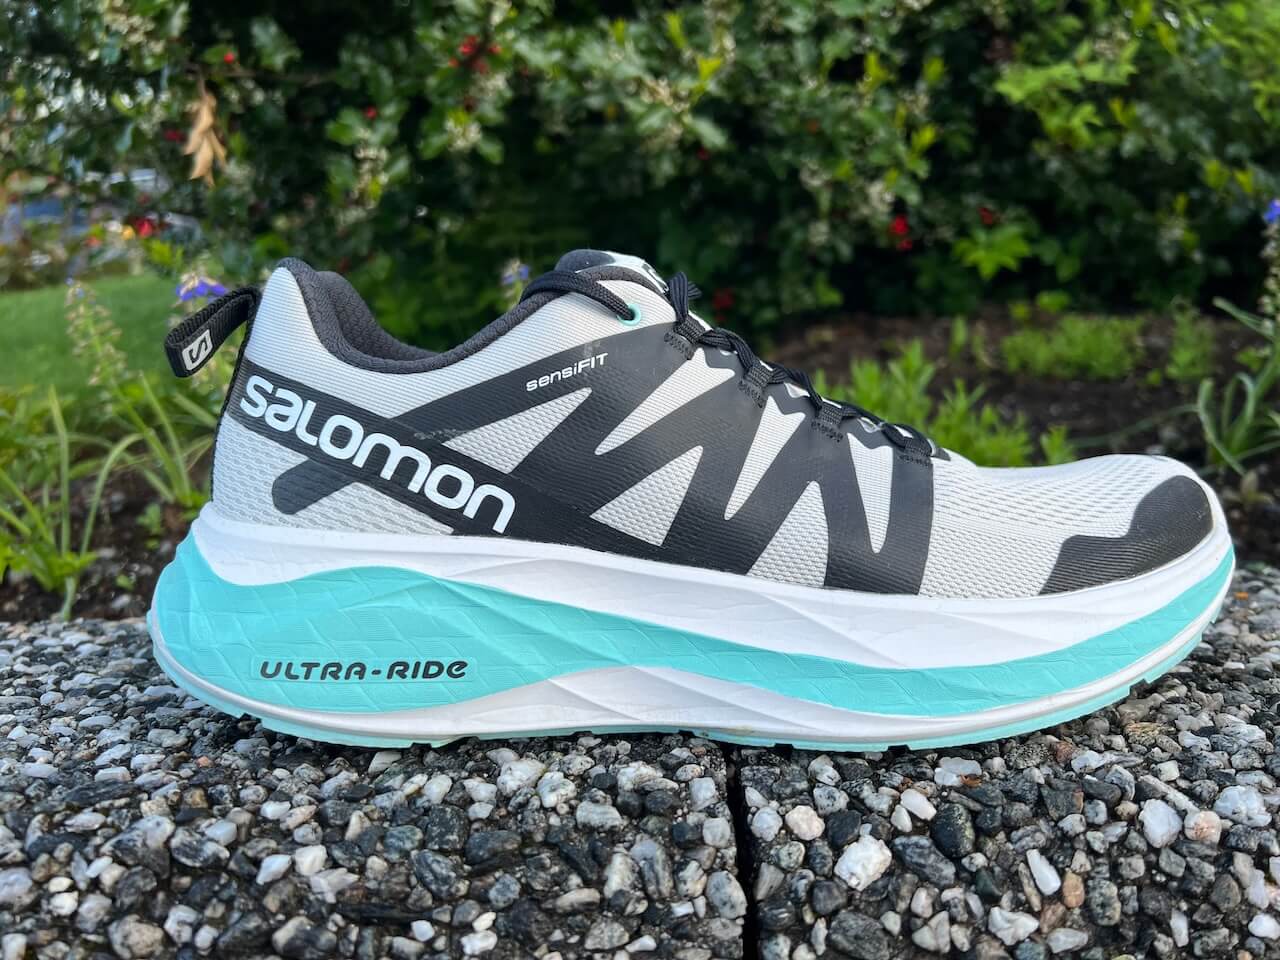 Featured image for “Test: Salomon Glide Max”